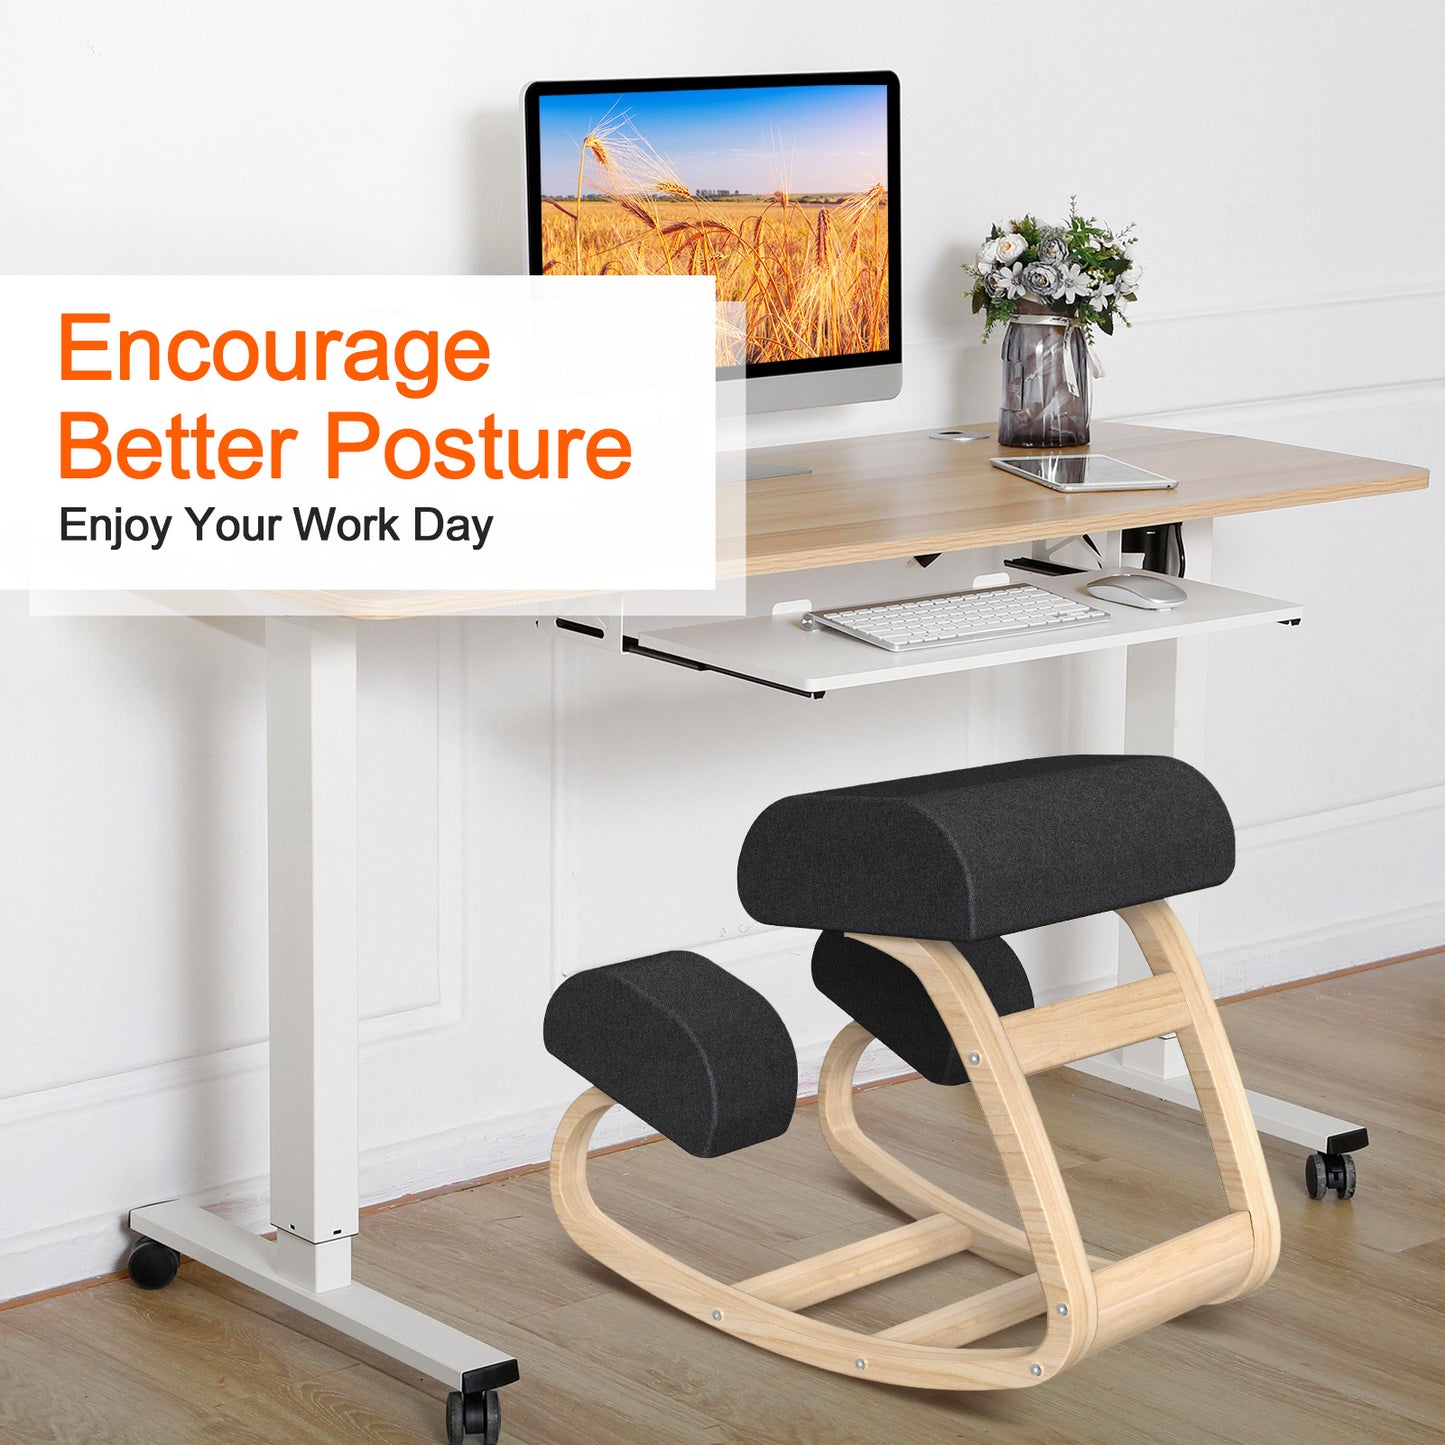 encourage better posture with a kneeling chair Black